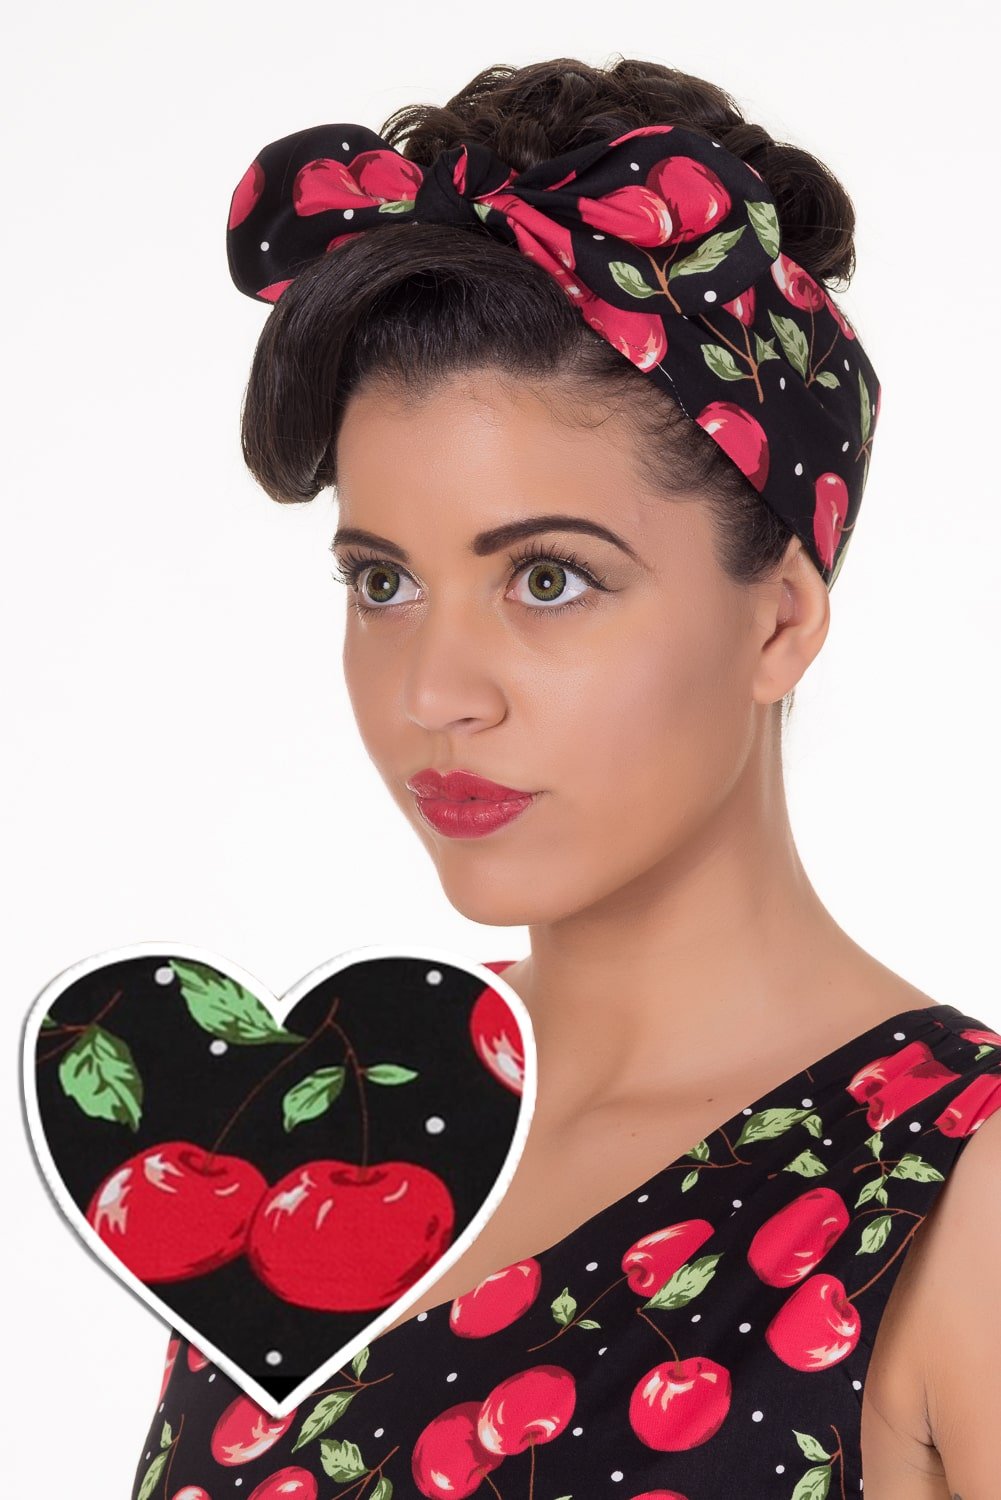 50's Inspired Vintage Headband in Black with Red Cherry